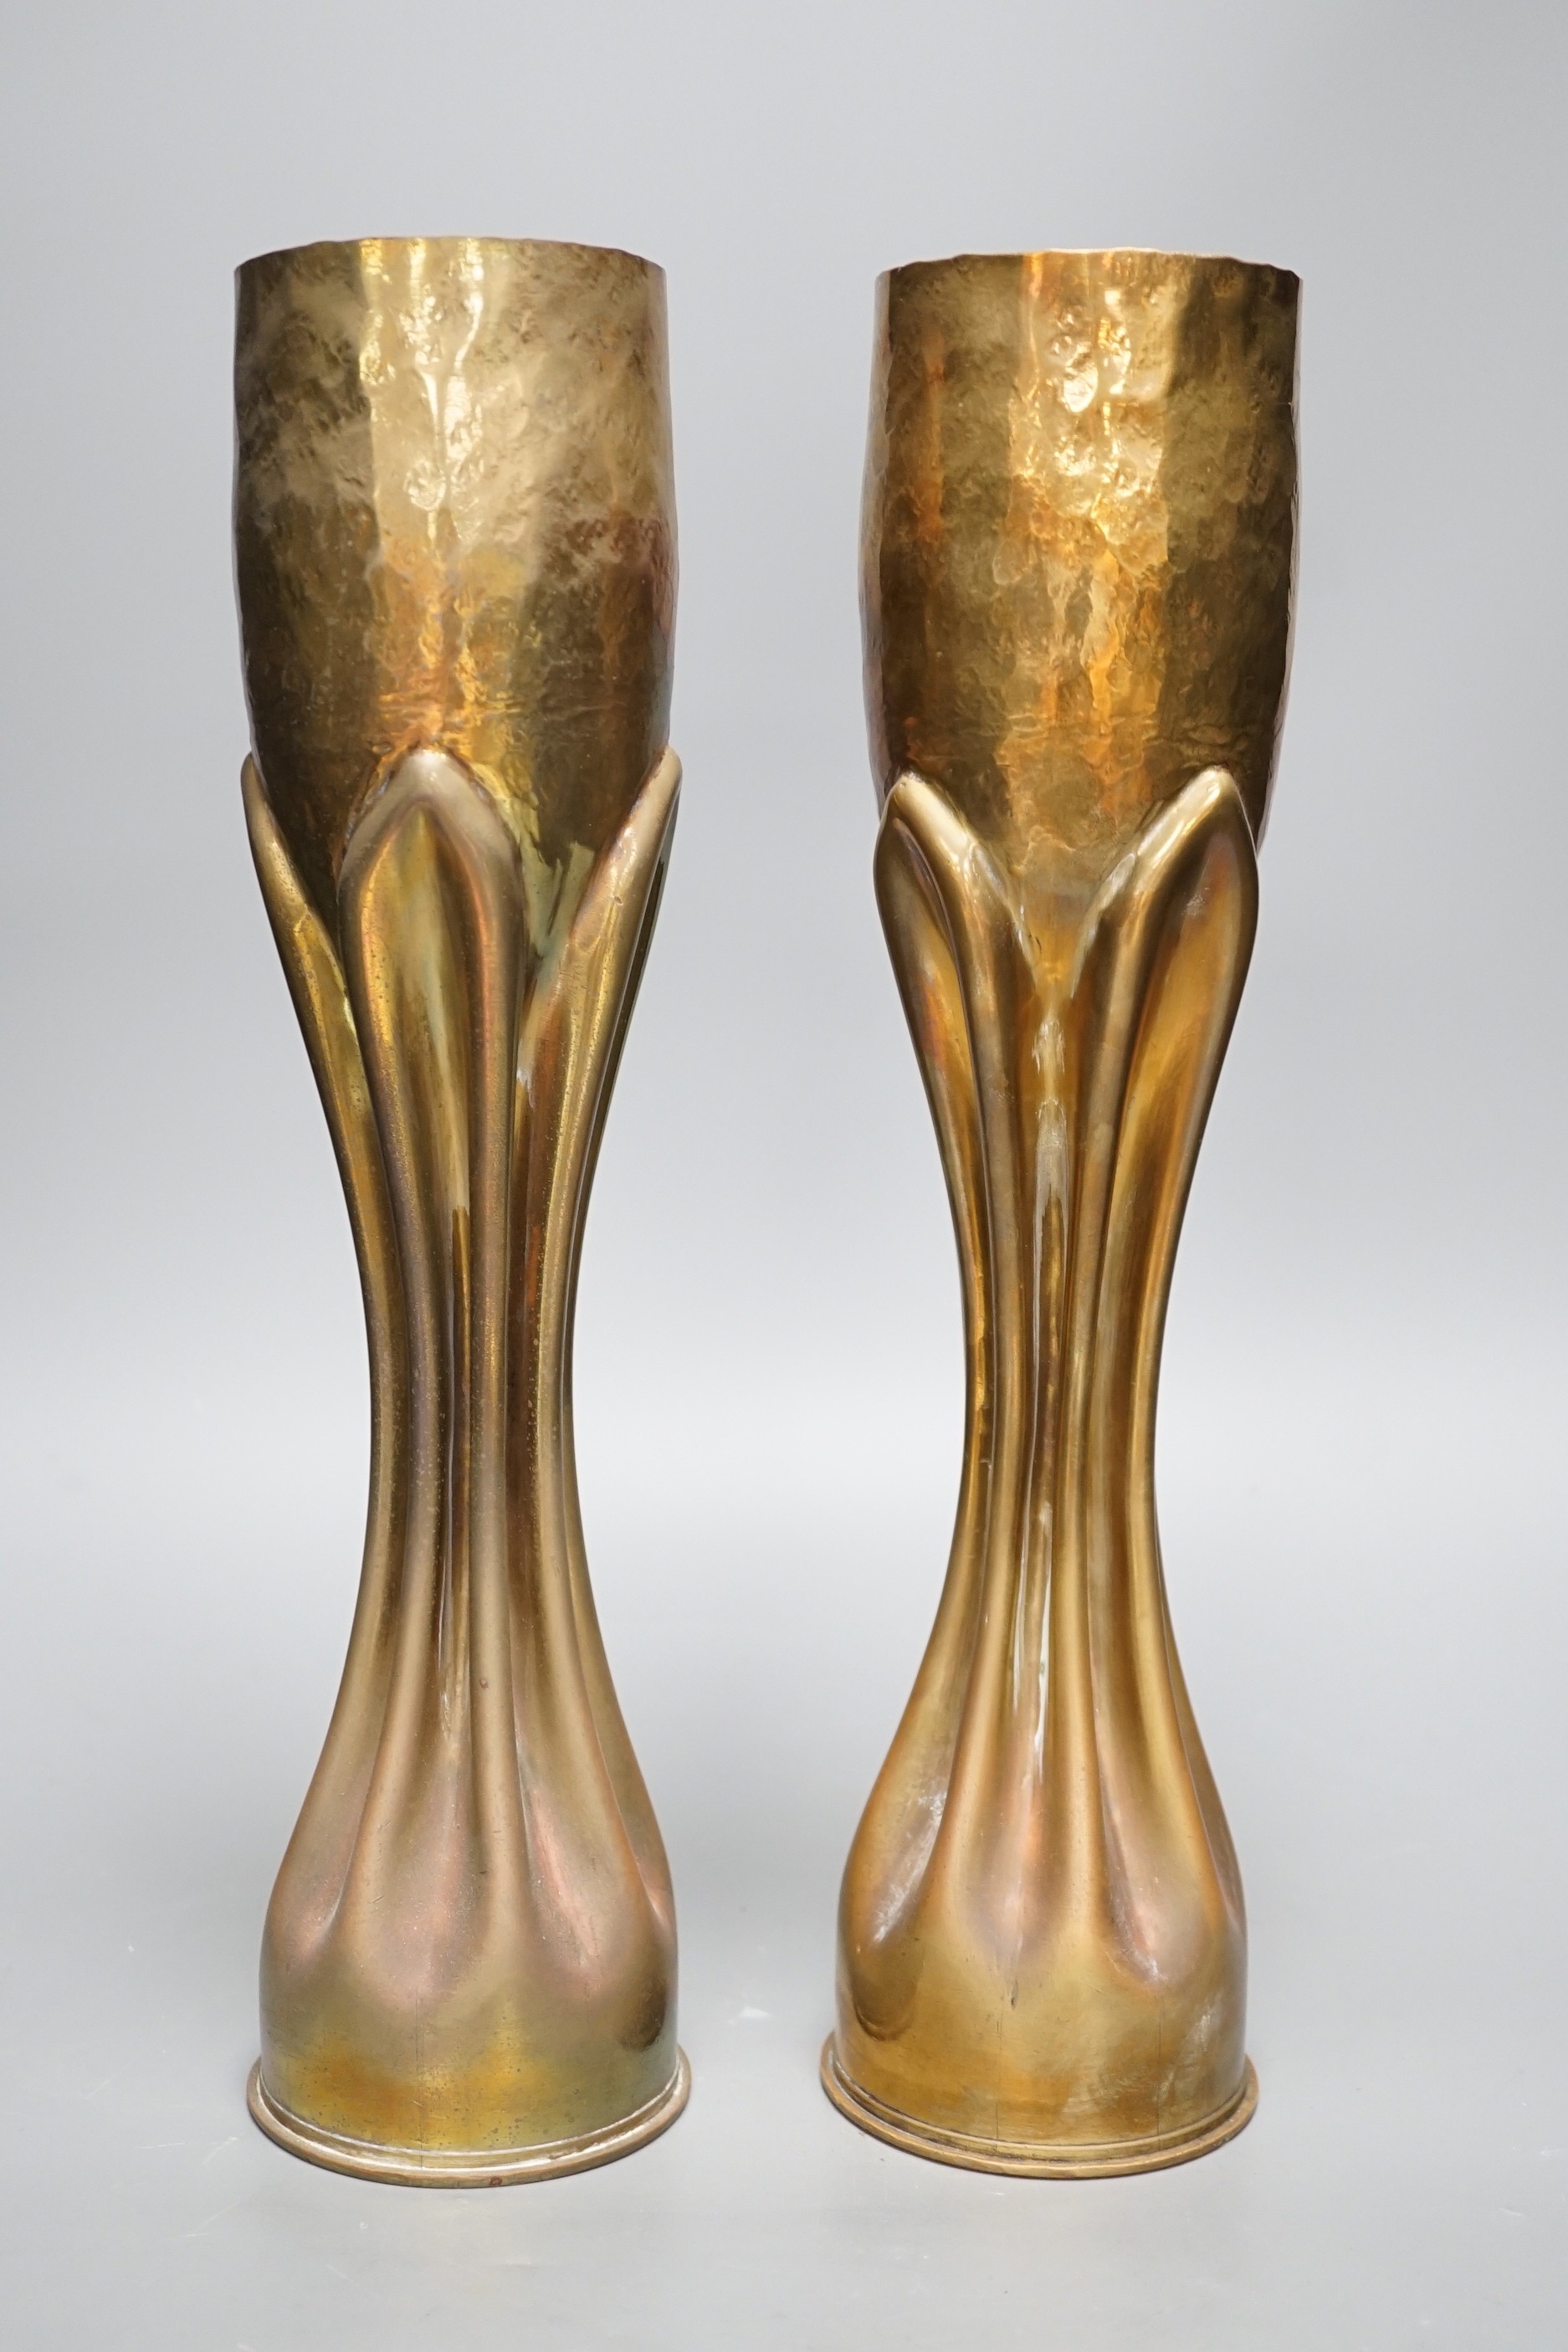 Trenchart- A pair of WWI brass shell case vases, 34.5cm tall - Image 2 of 4